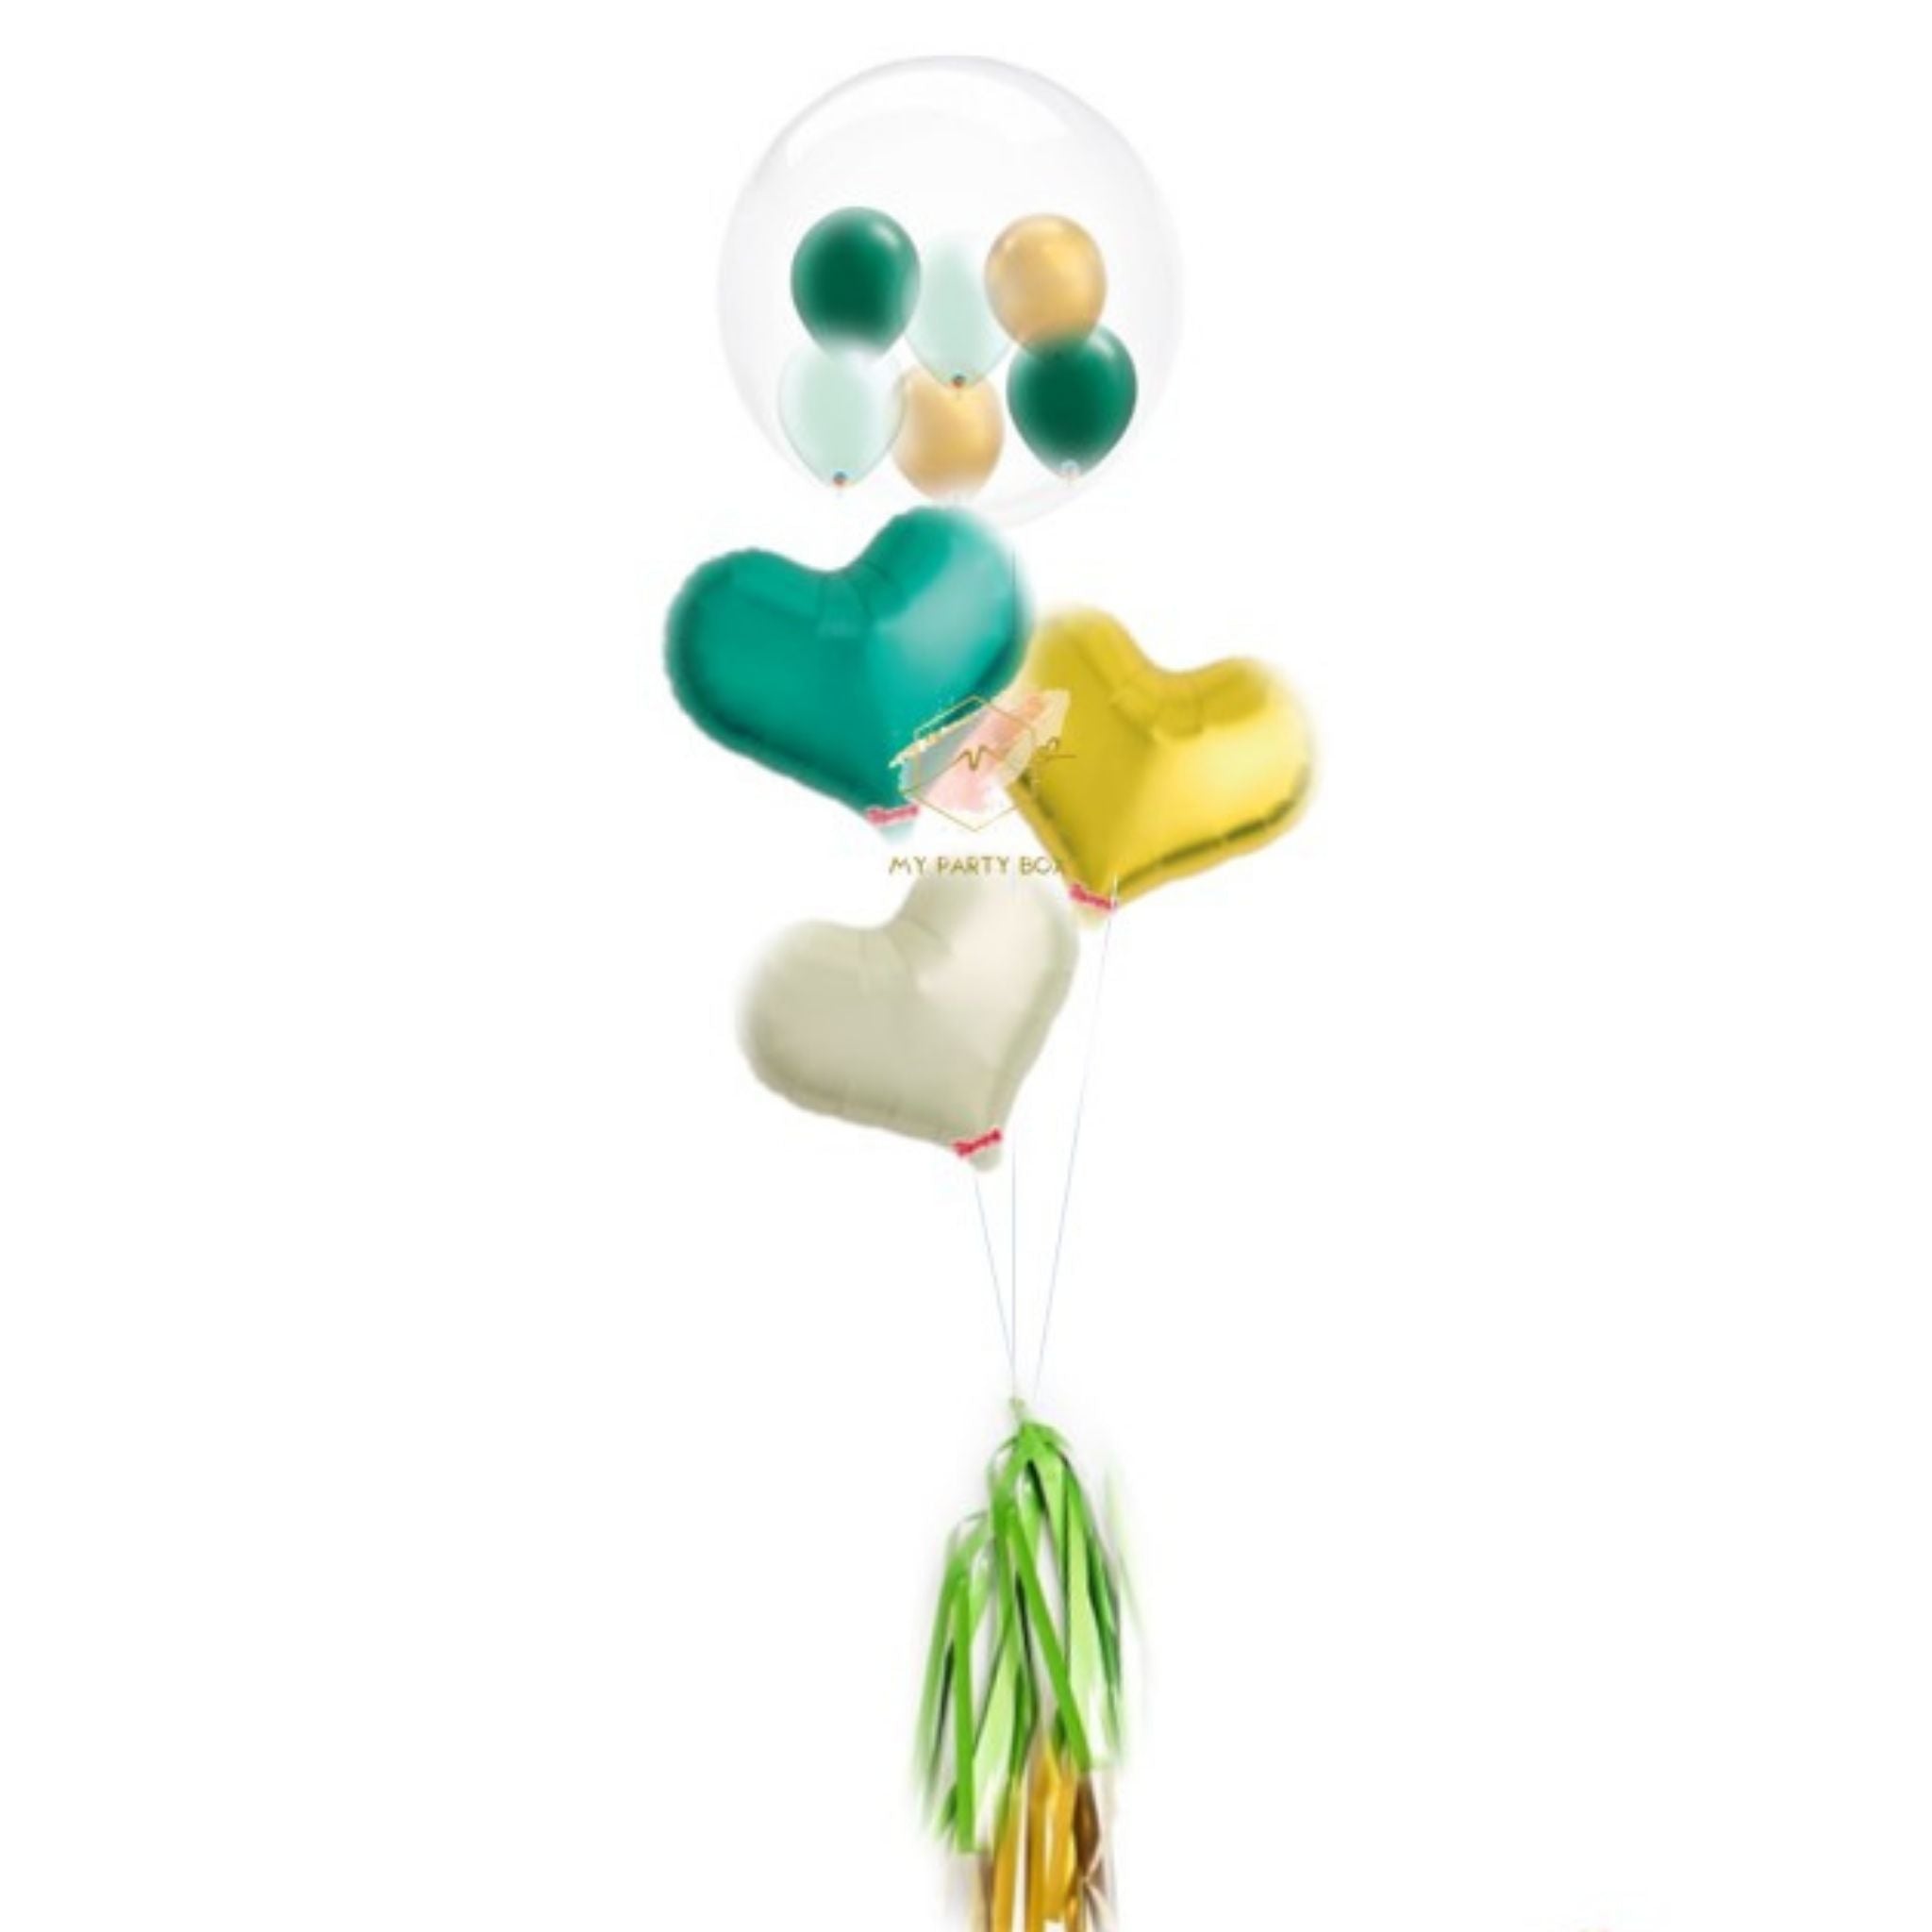 My Party Box Bubble Gum Balloon Bouquet with one bubble balloon with mini latex balloon inside and one Green foil heart balloon, one Gold foil heart balloon and Ivory Foil Heart Balloon